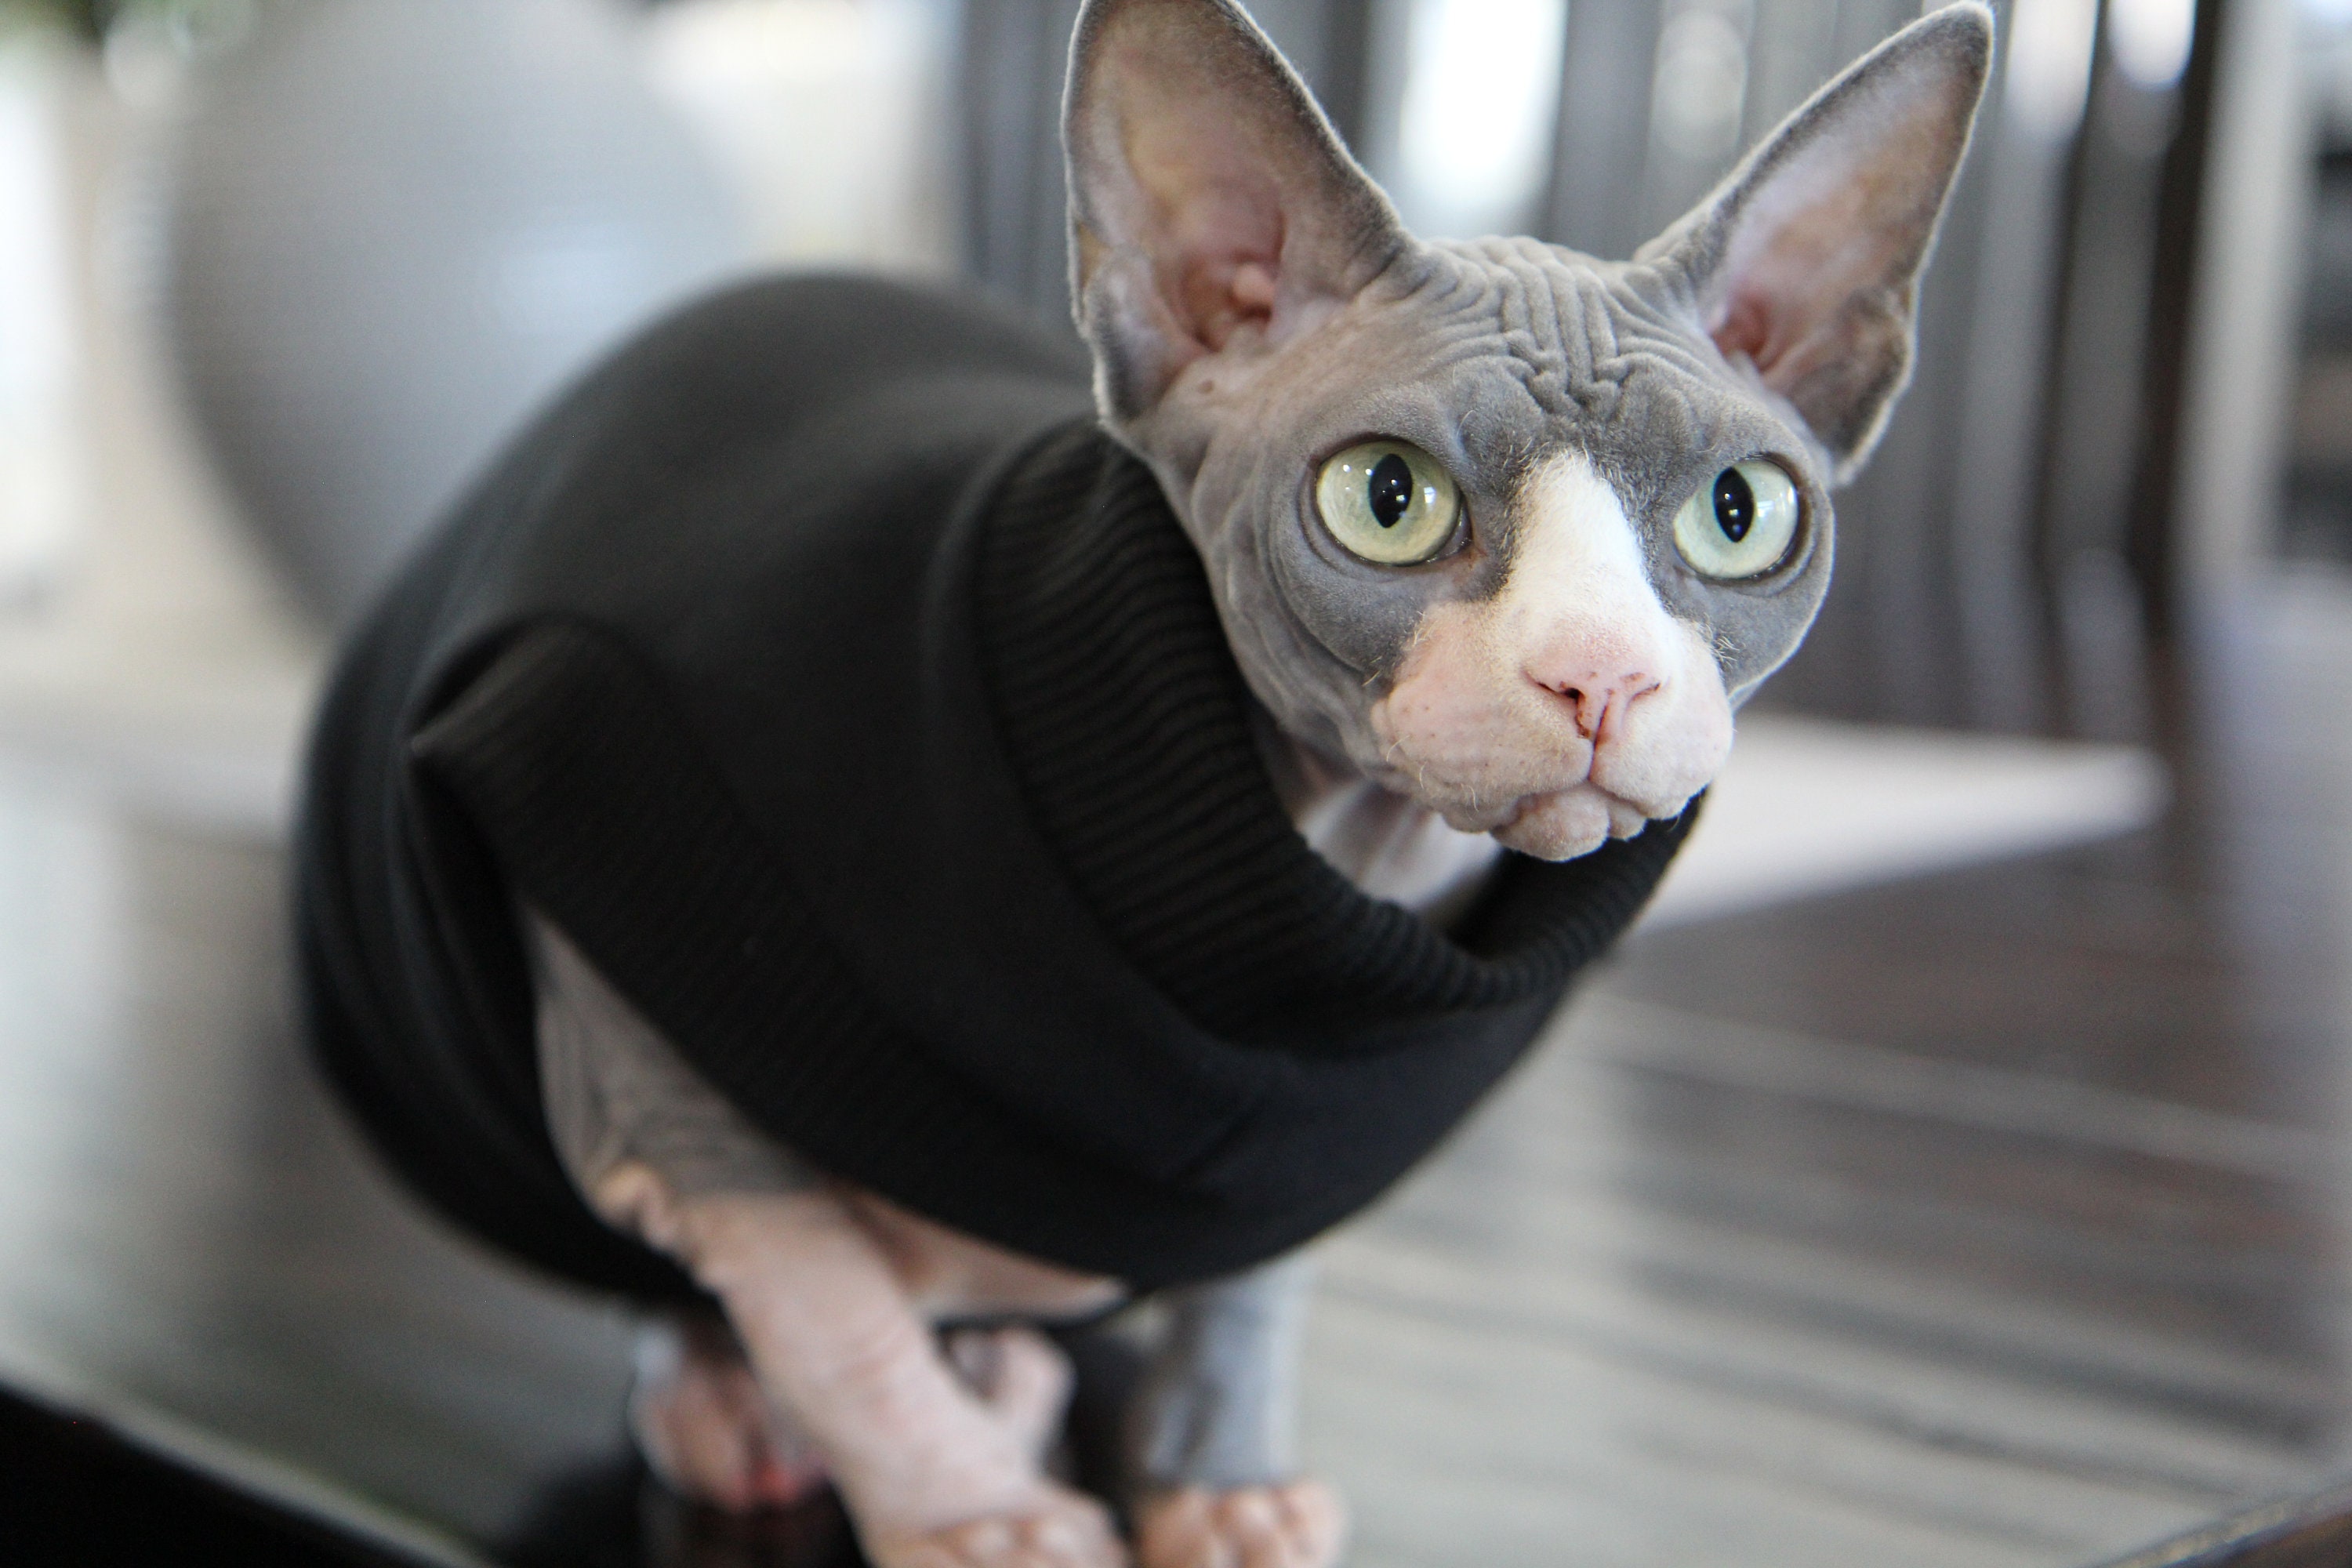 The Cat Face Jacket  The North Face Jacket for Sphynx, Jacket for Cat